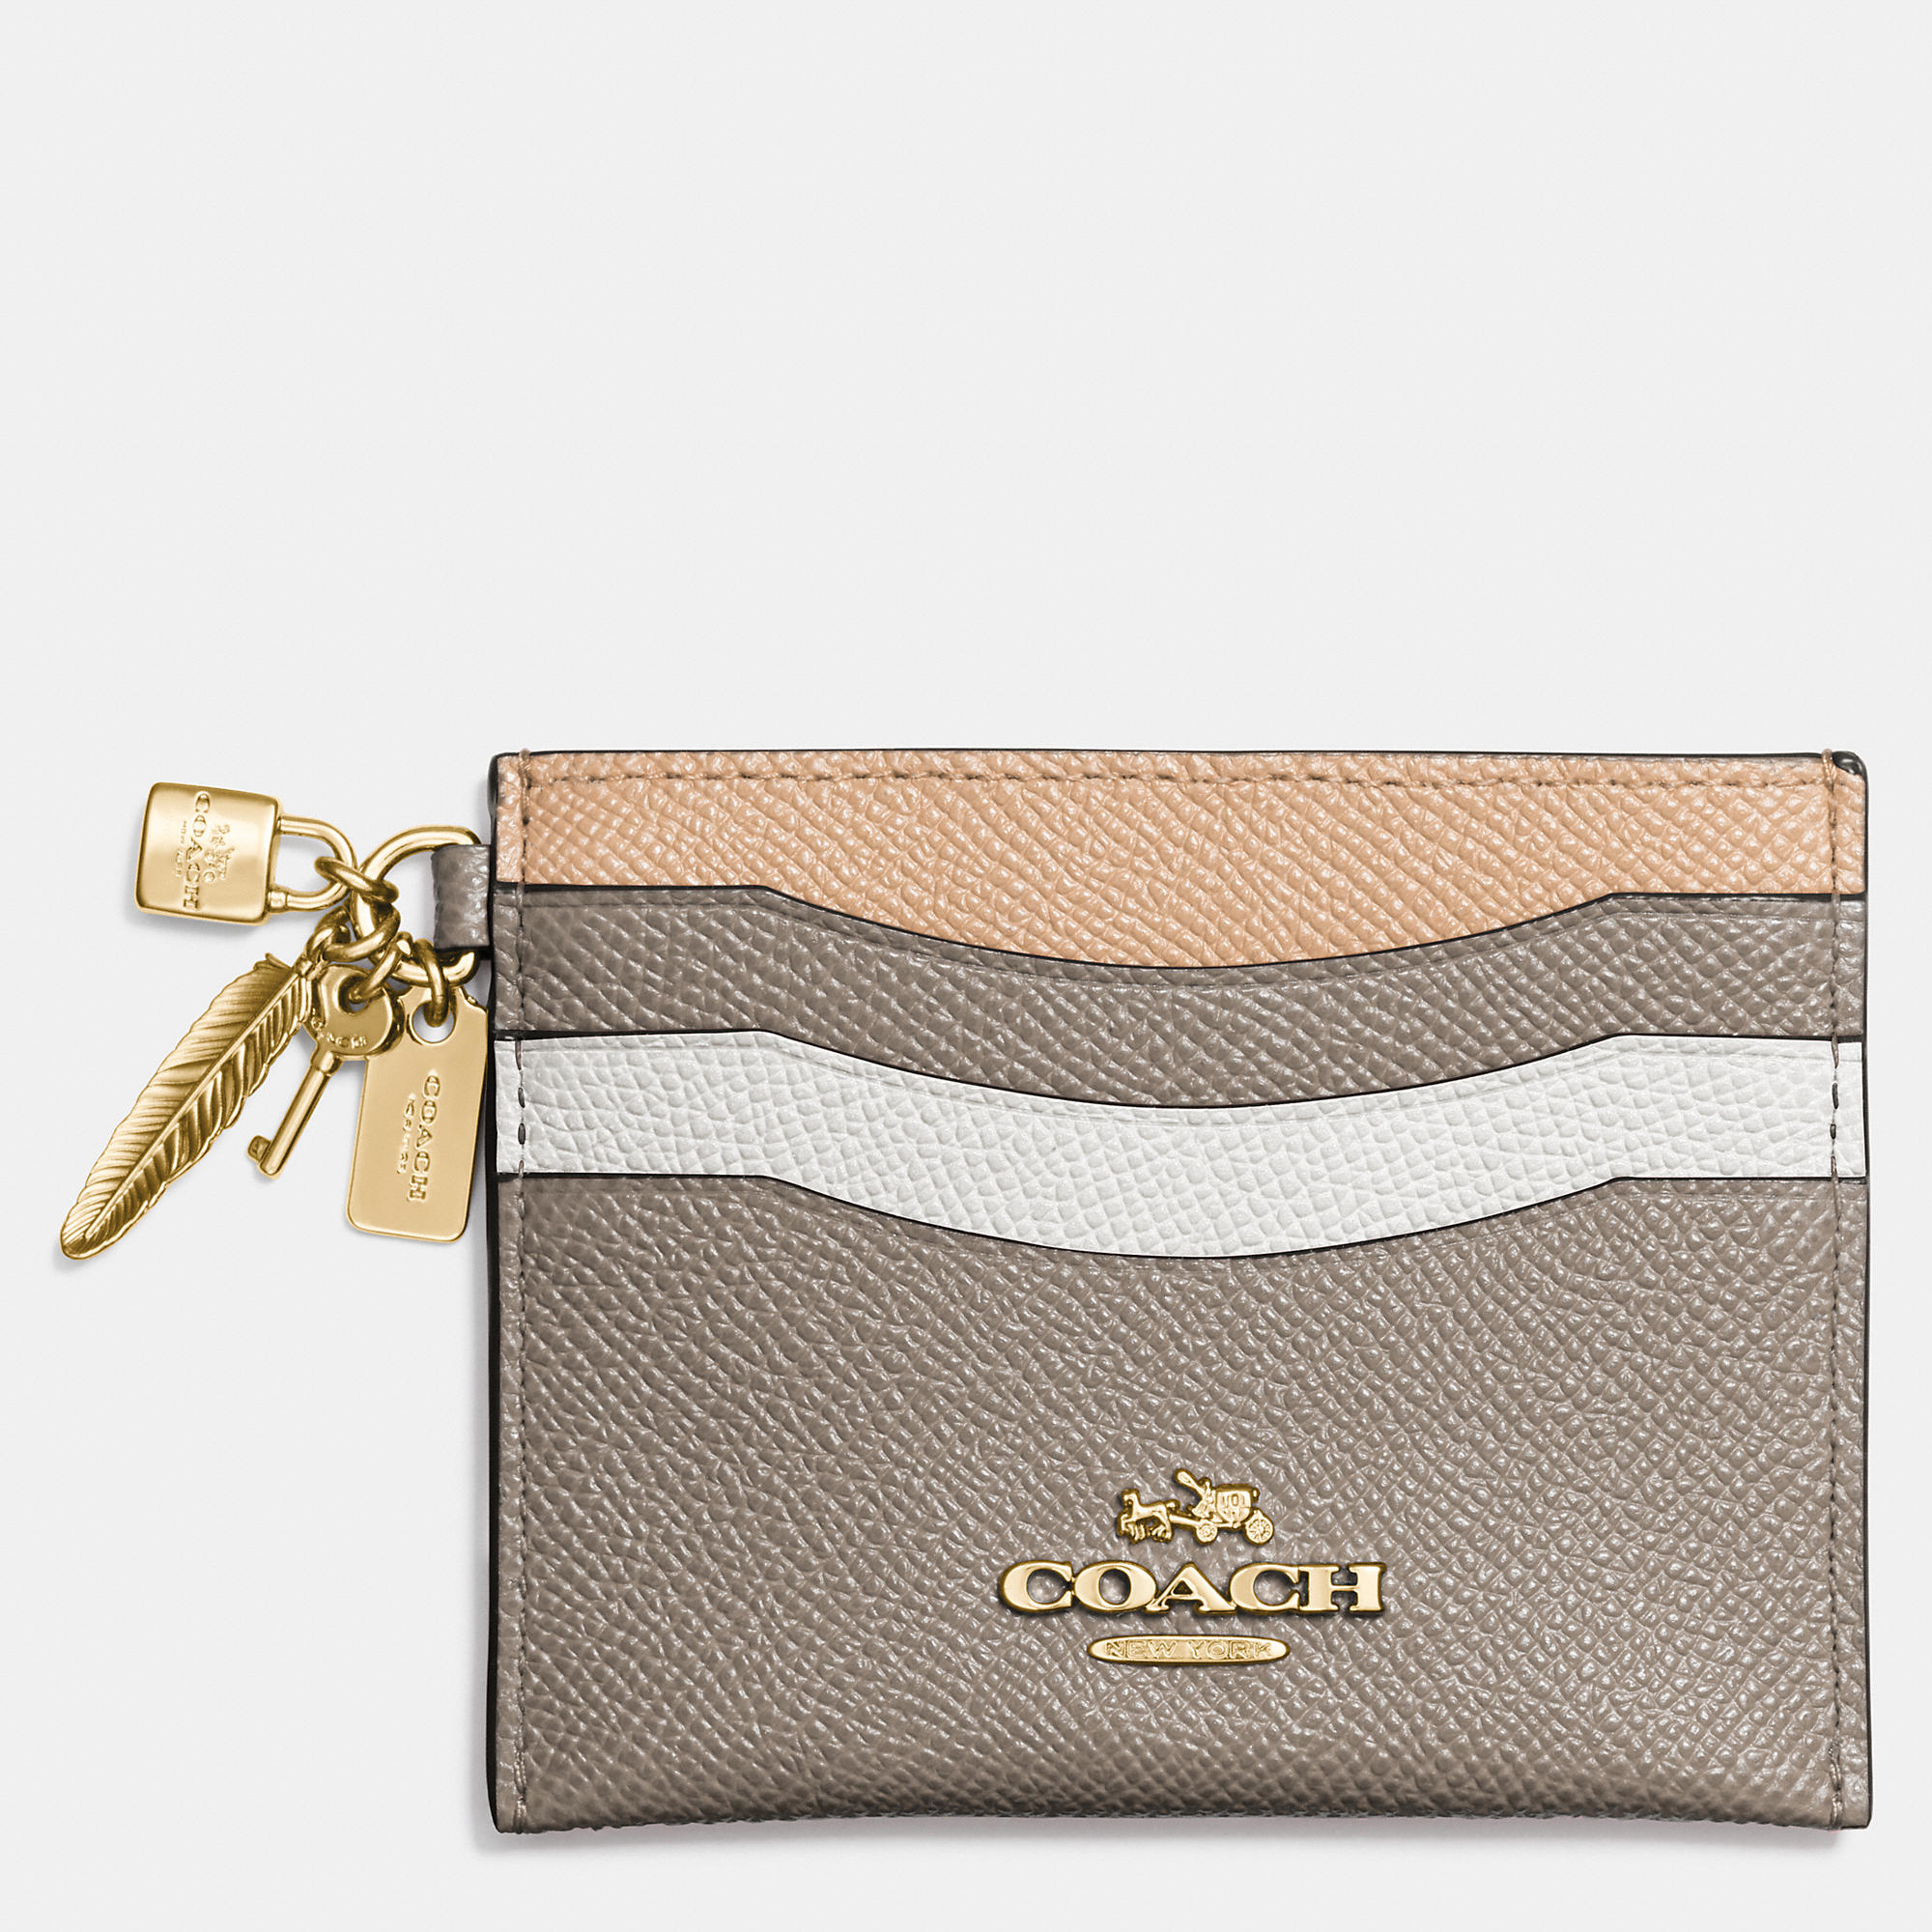 COACH Charm Flat Card Case In Colorblock Leather in Metallic